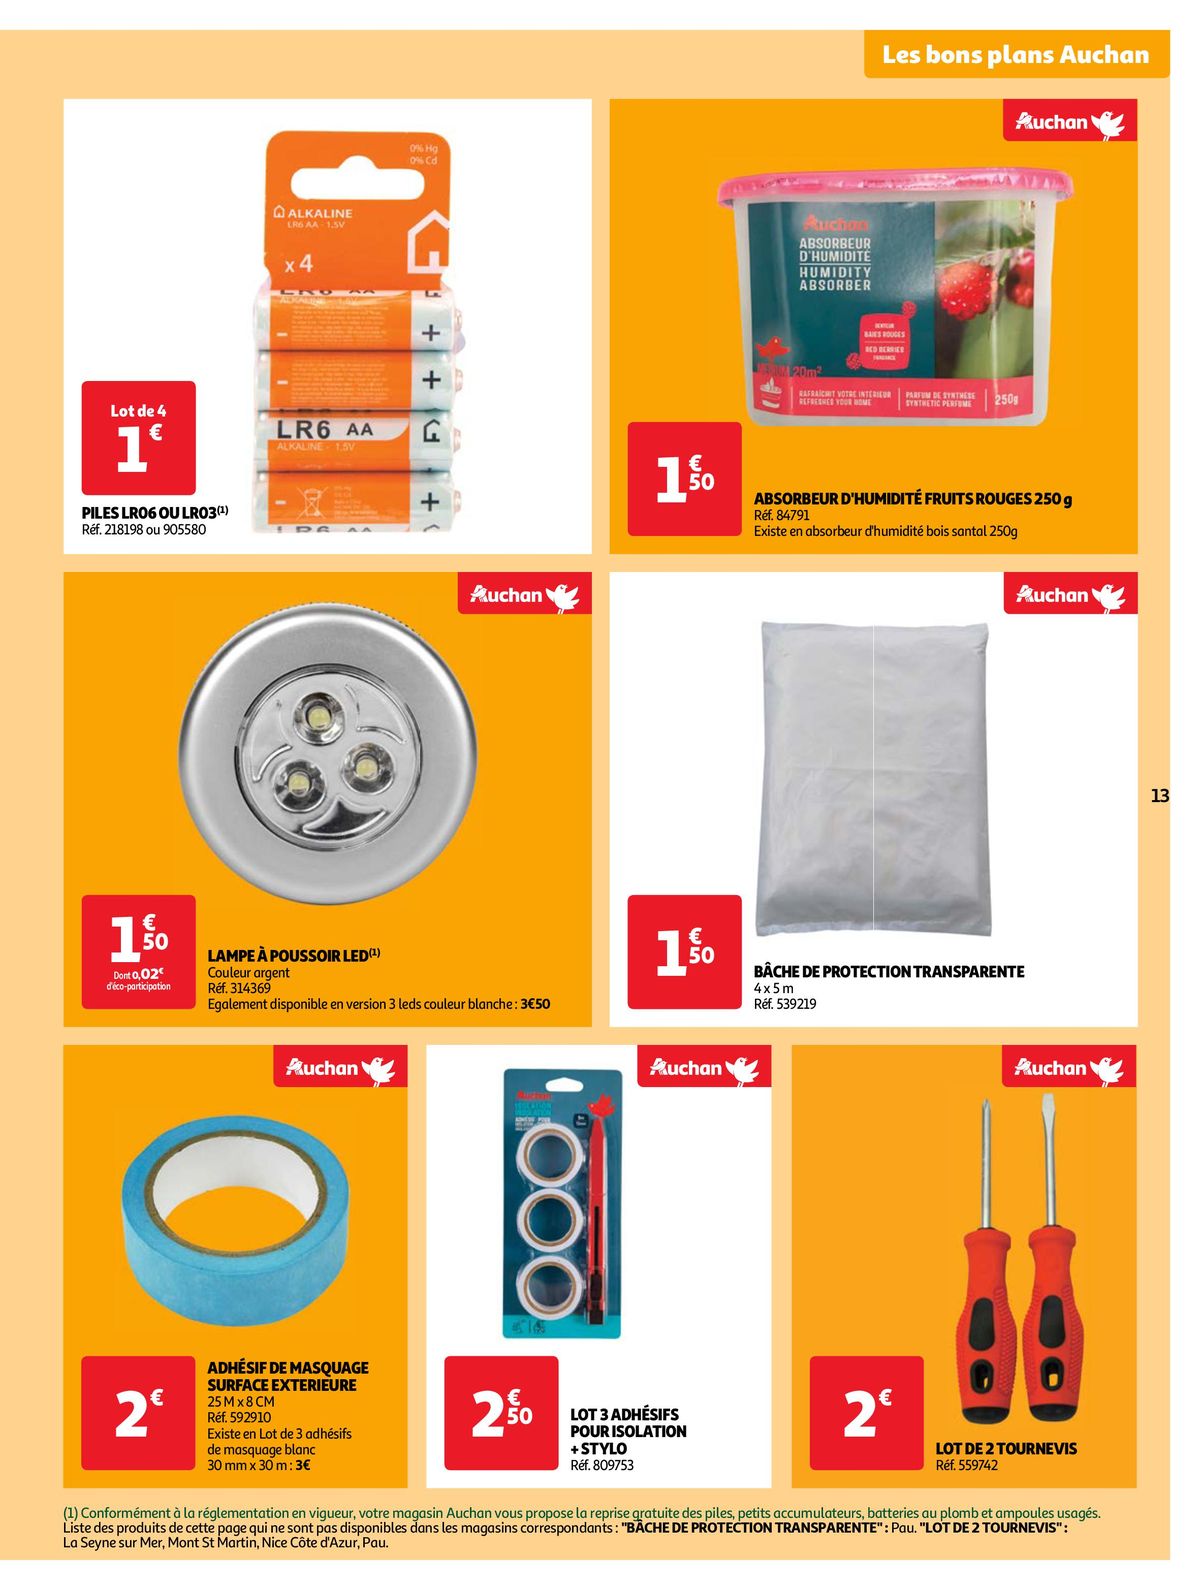 Catalogue Nos solutions anti-inflation pro plaisir !, page 00013